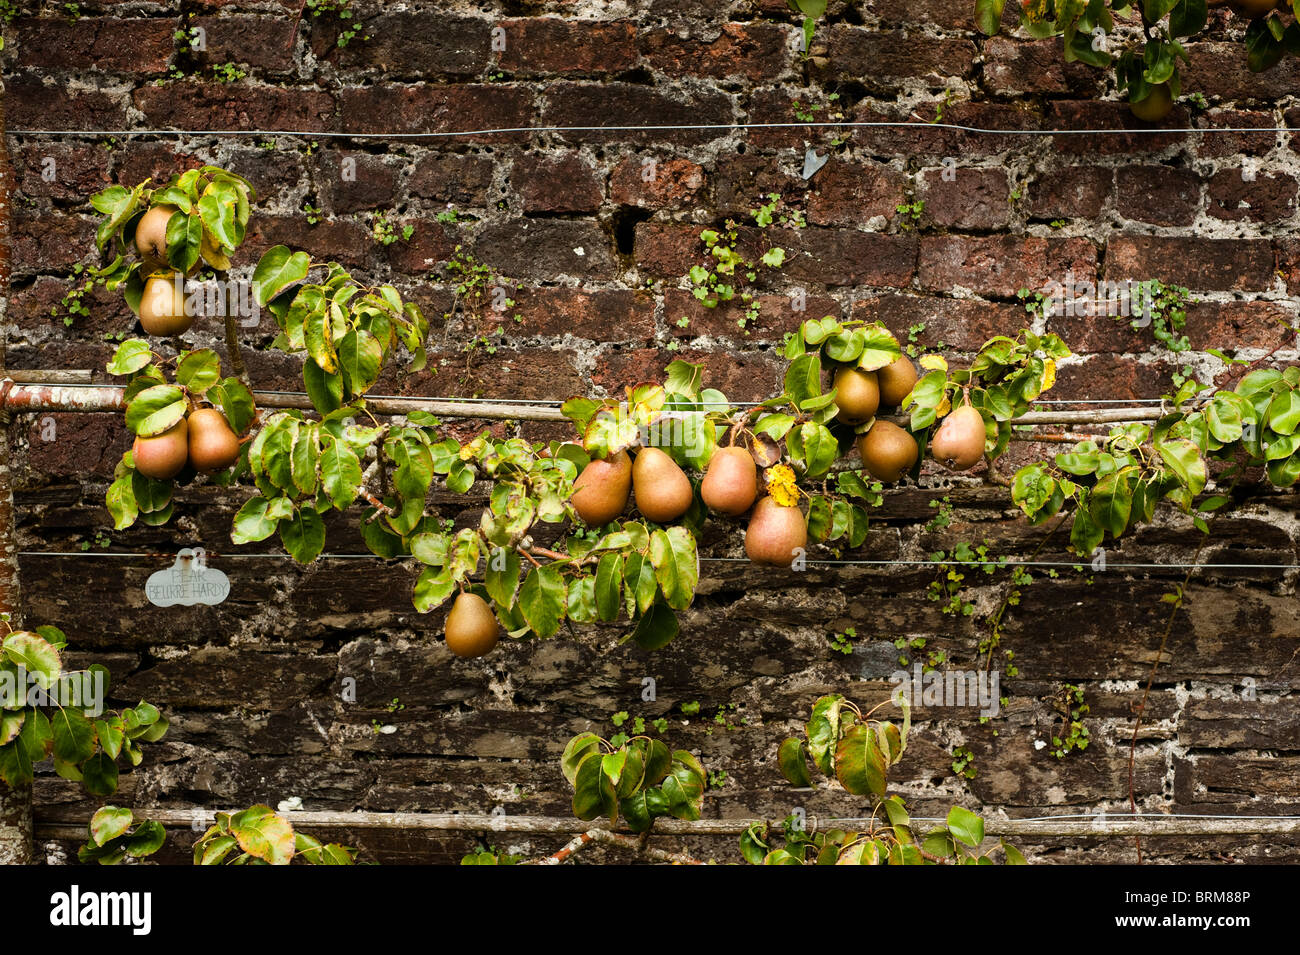 Espaliered Pear, Pyrus communis ‘Beurre Hardy’, growing at The Lost Gardens of Heligan in Cornwall, United Kingdom Stock Photo